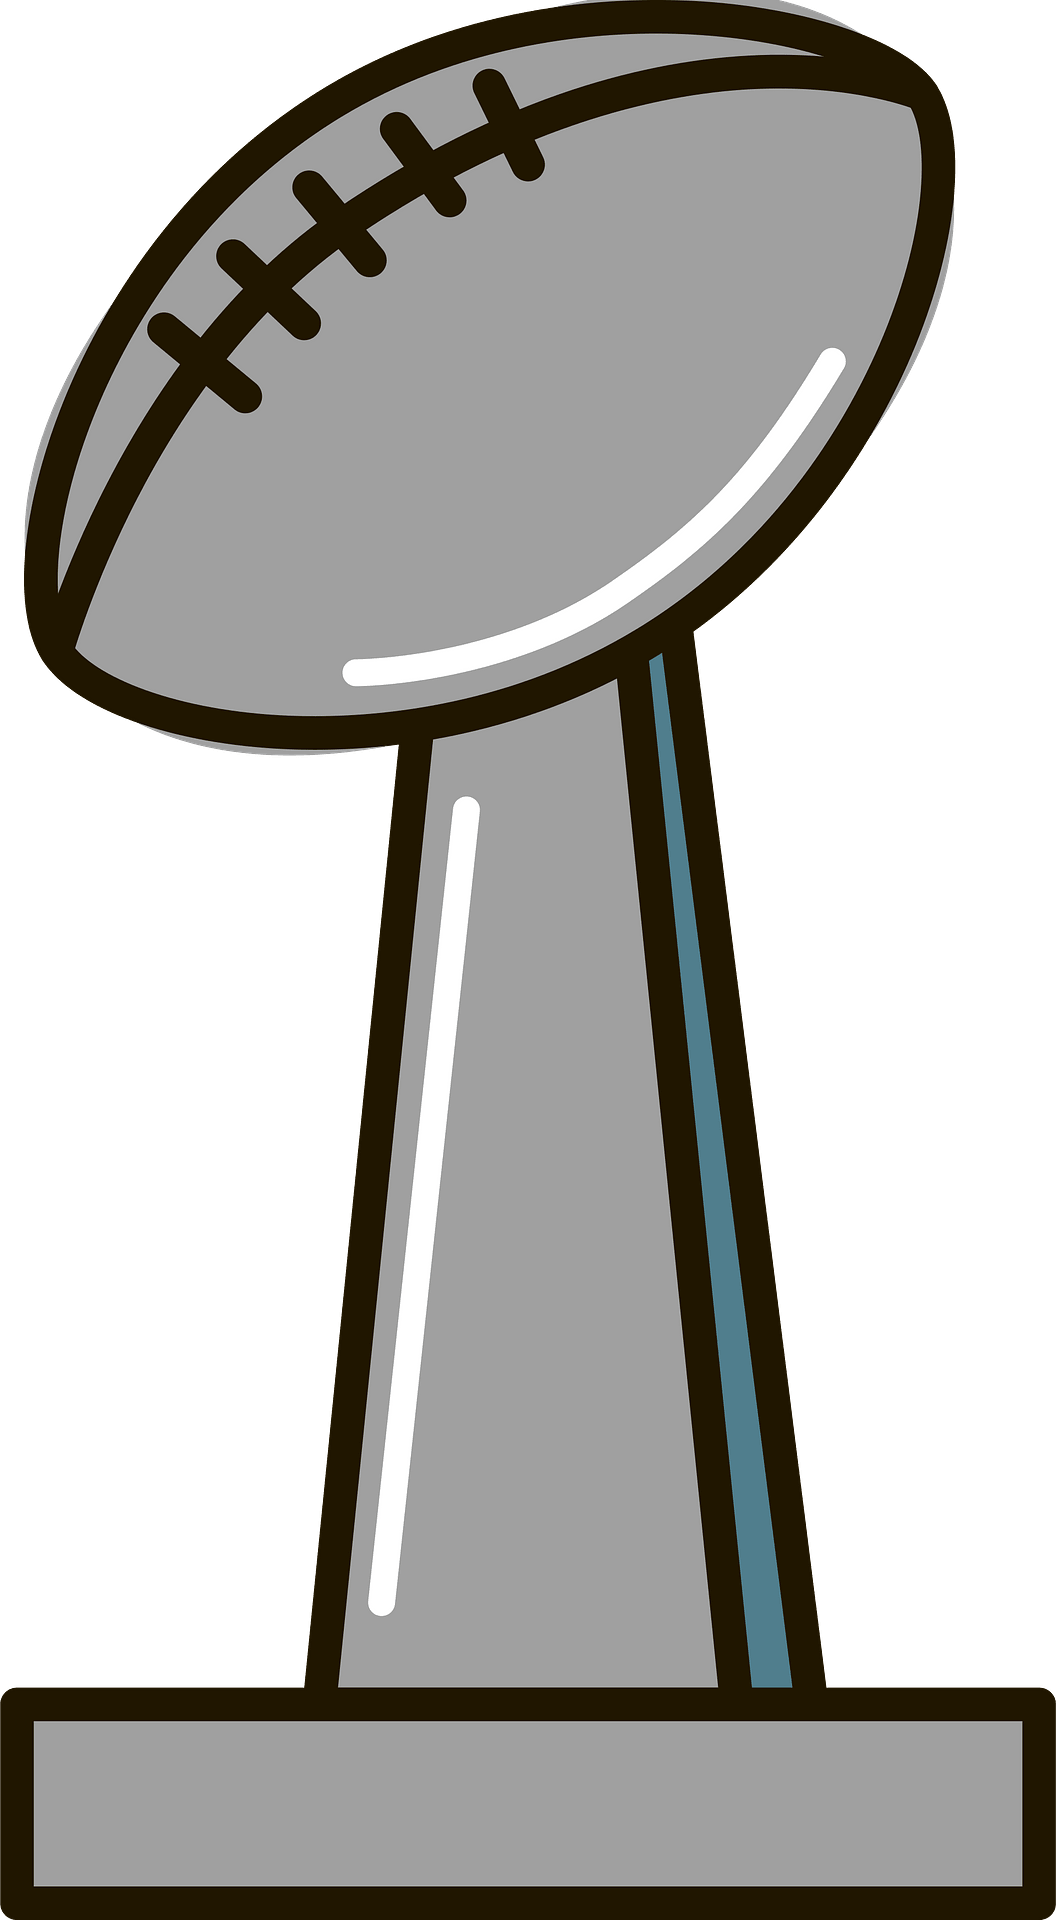 Super Bowl Silhouette PNG Image HD